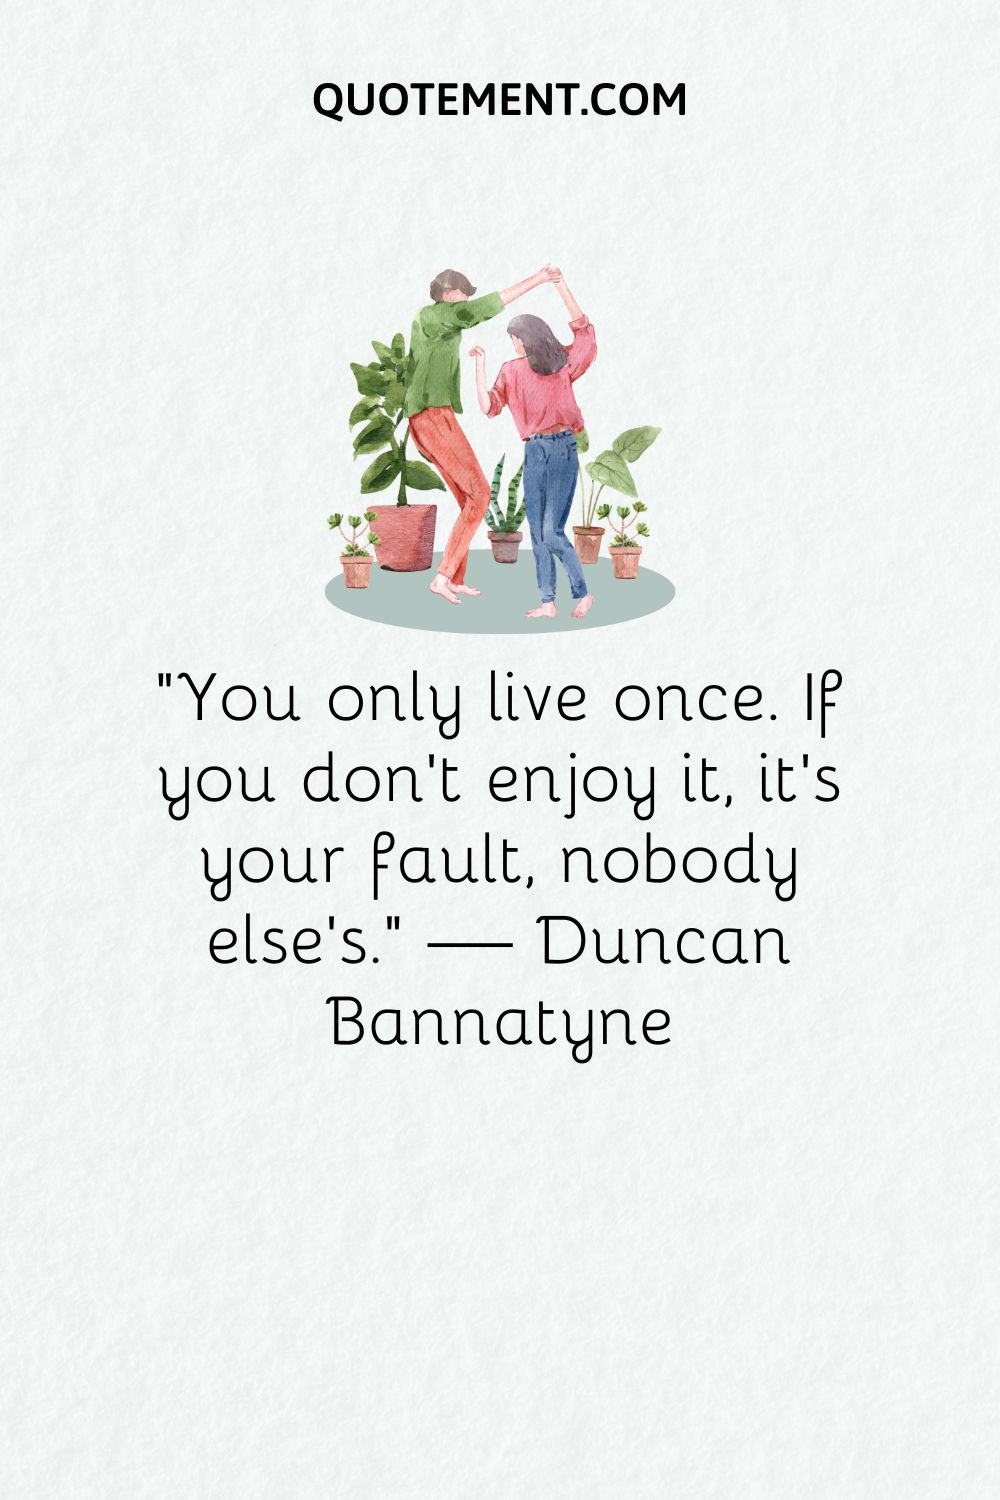 “You only live once. If you don’t enjoy it, it’s your fault, nobody else’s.” — Duncan Bannatyne